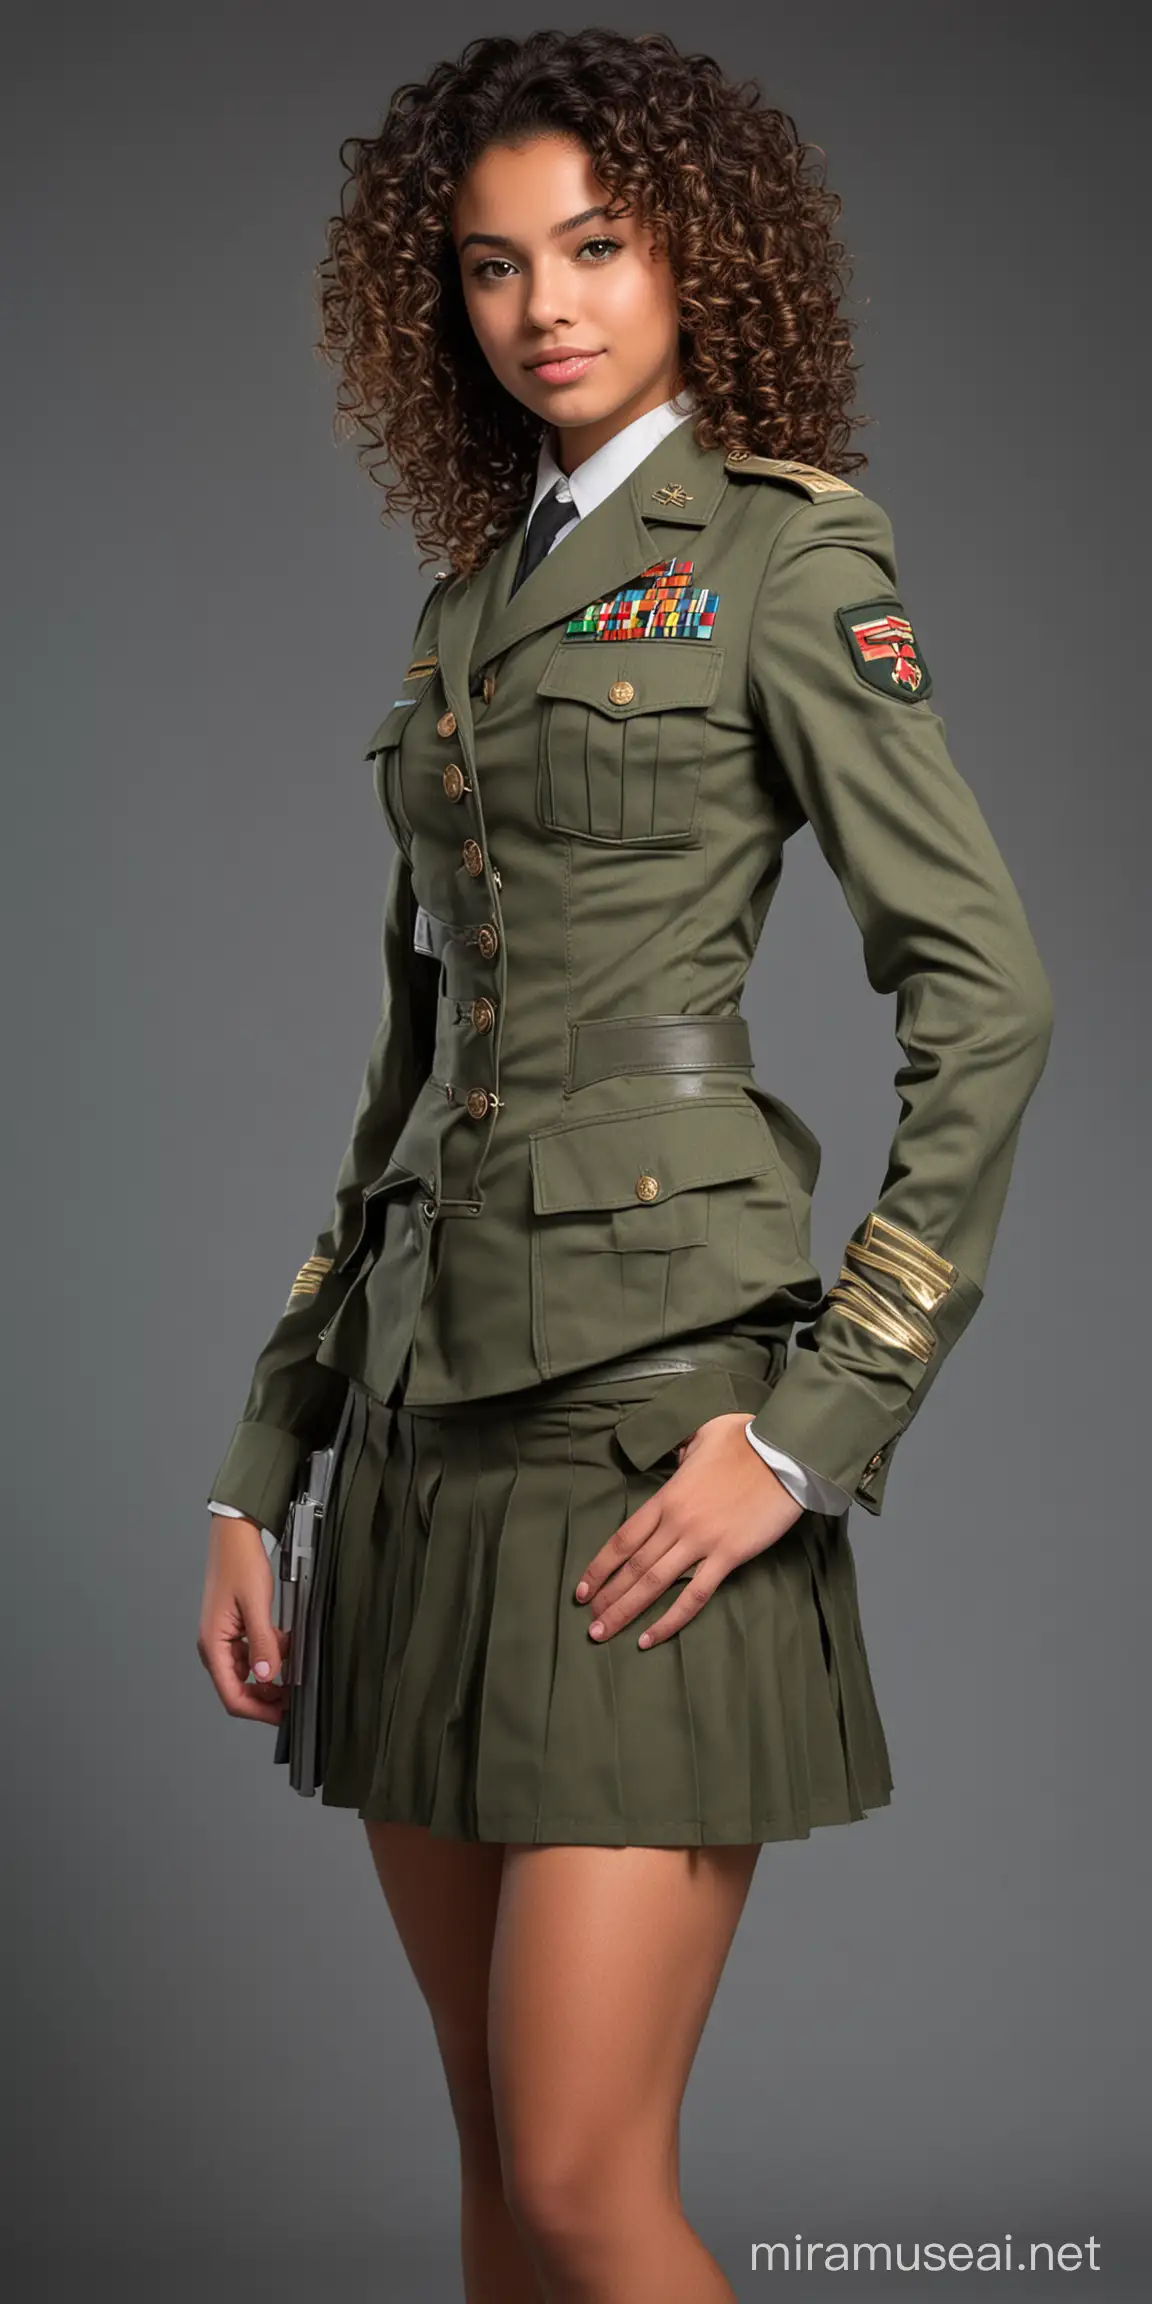 DarkSkinned Giantess in Military Uniform with Shrink Ray